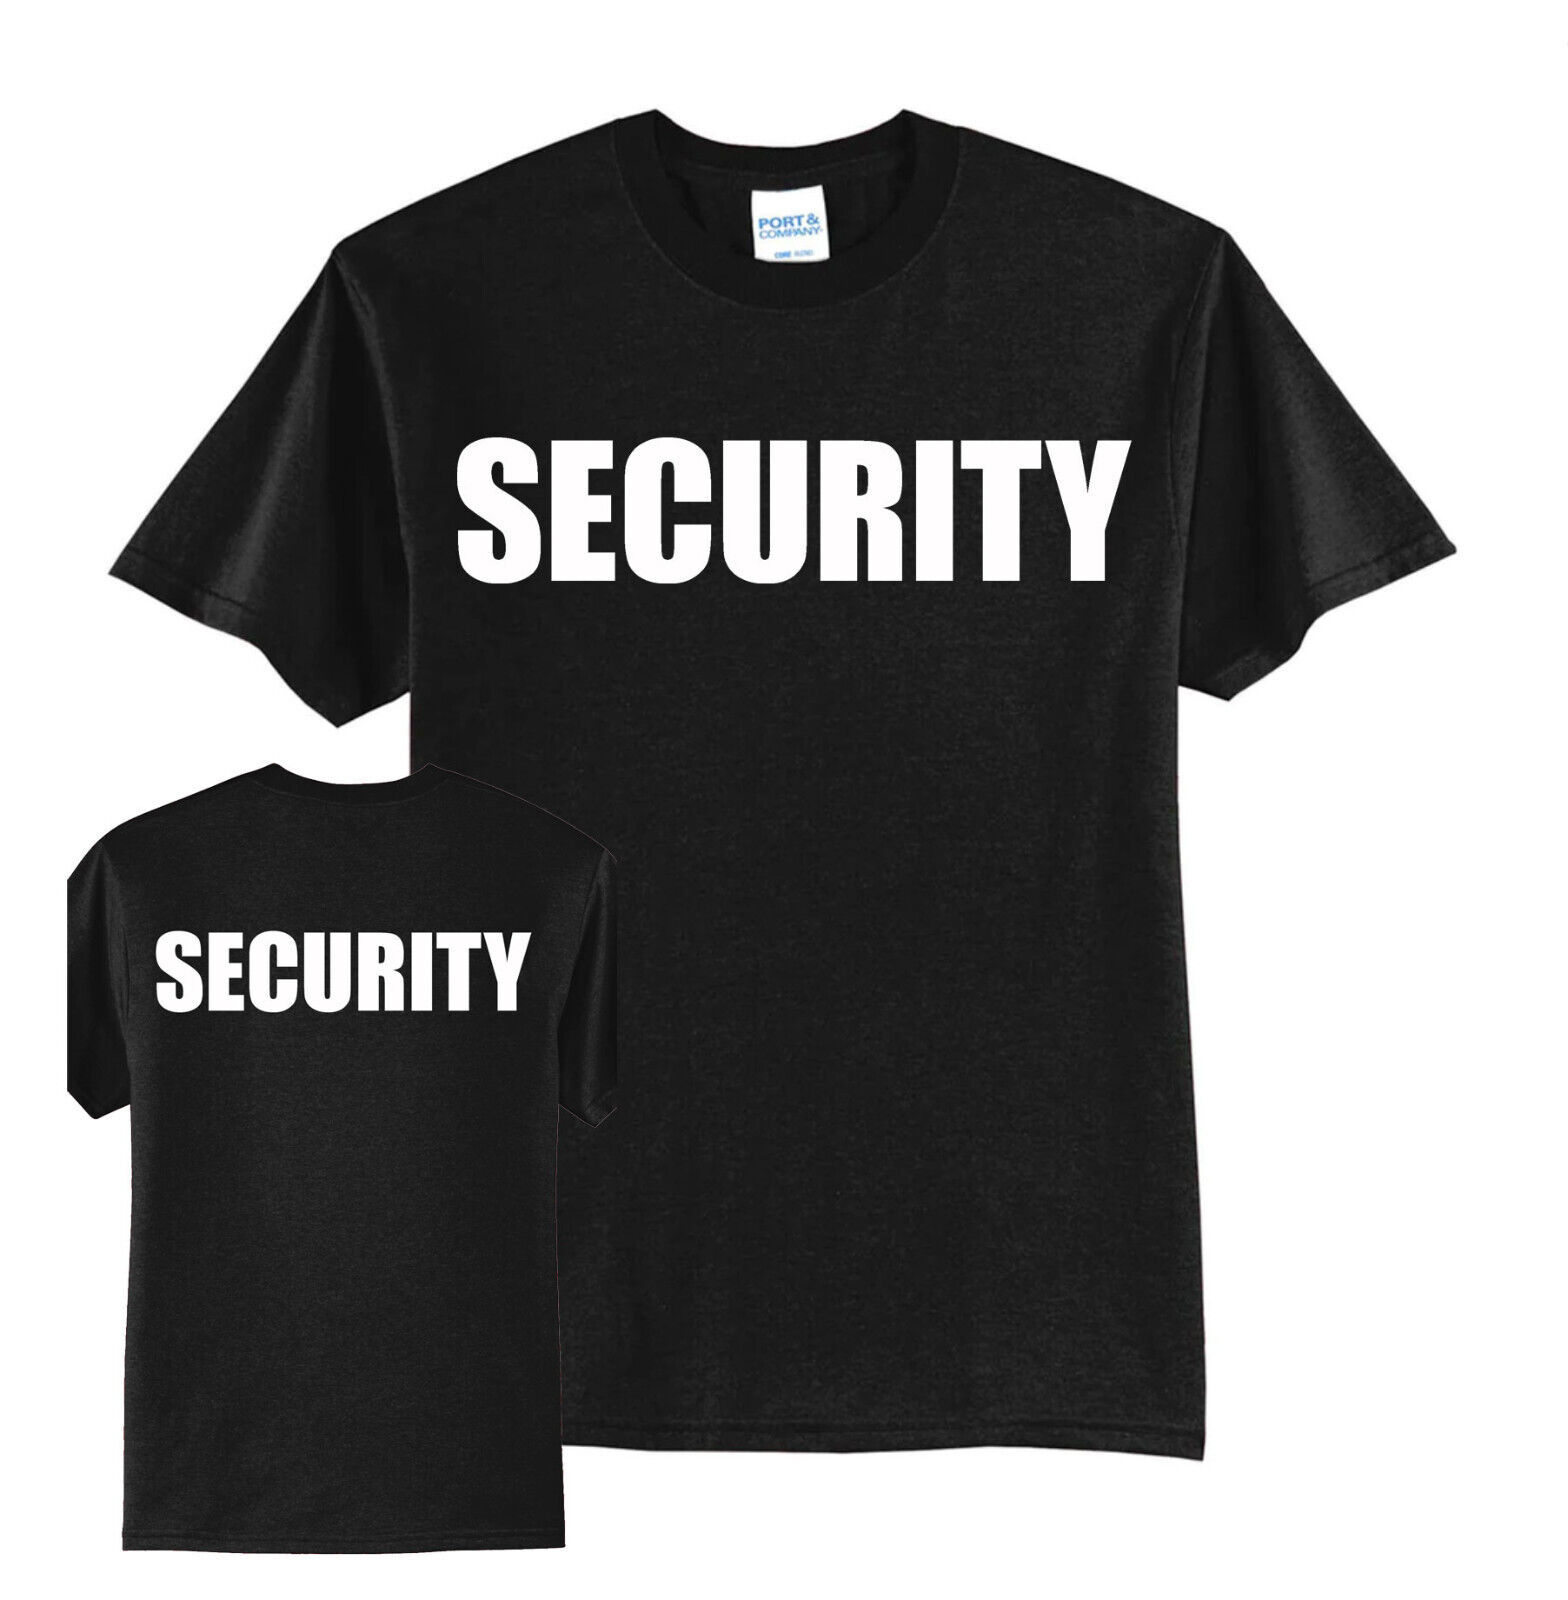 Primary image for SECURITY-NEW BLACK T-SHIRT-FRONT & BACK PRINT-S-M-L-XL-FOR CONCERTS-CLUBS-STAFF